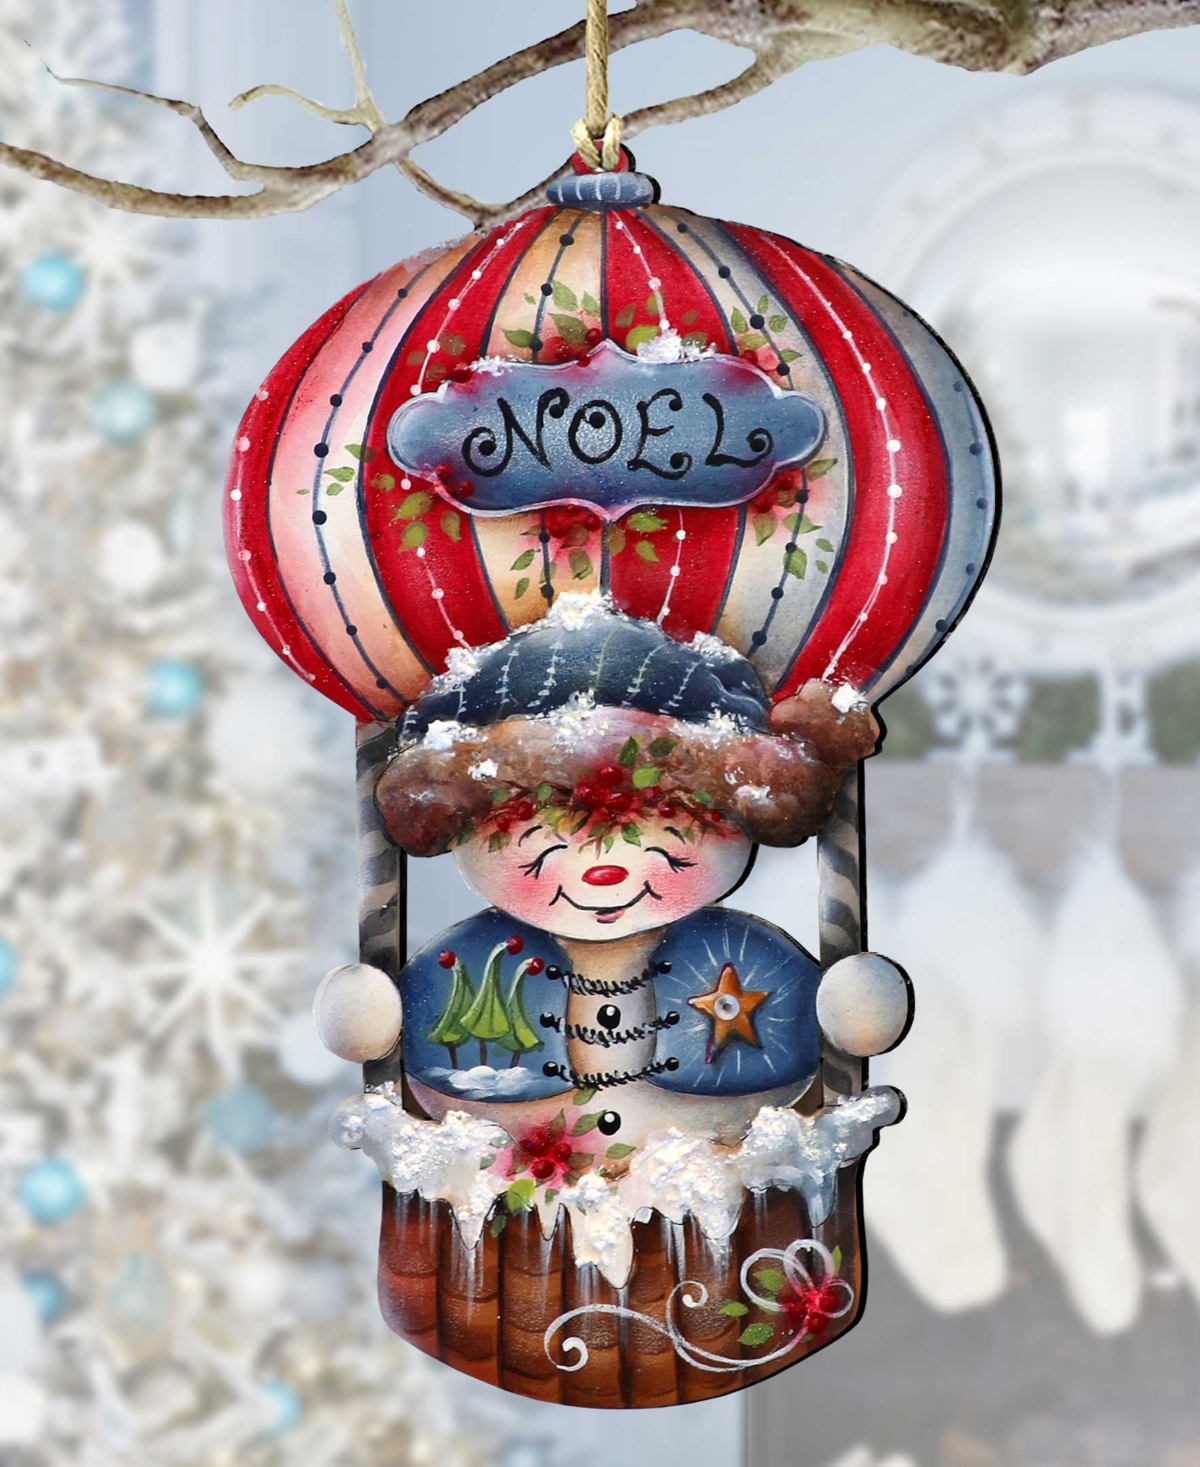 Designocracy Frosty Journey Christmas Wooden Ornaments Holiday Decor J. Mills-price In Multi Color